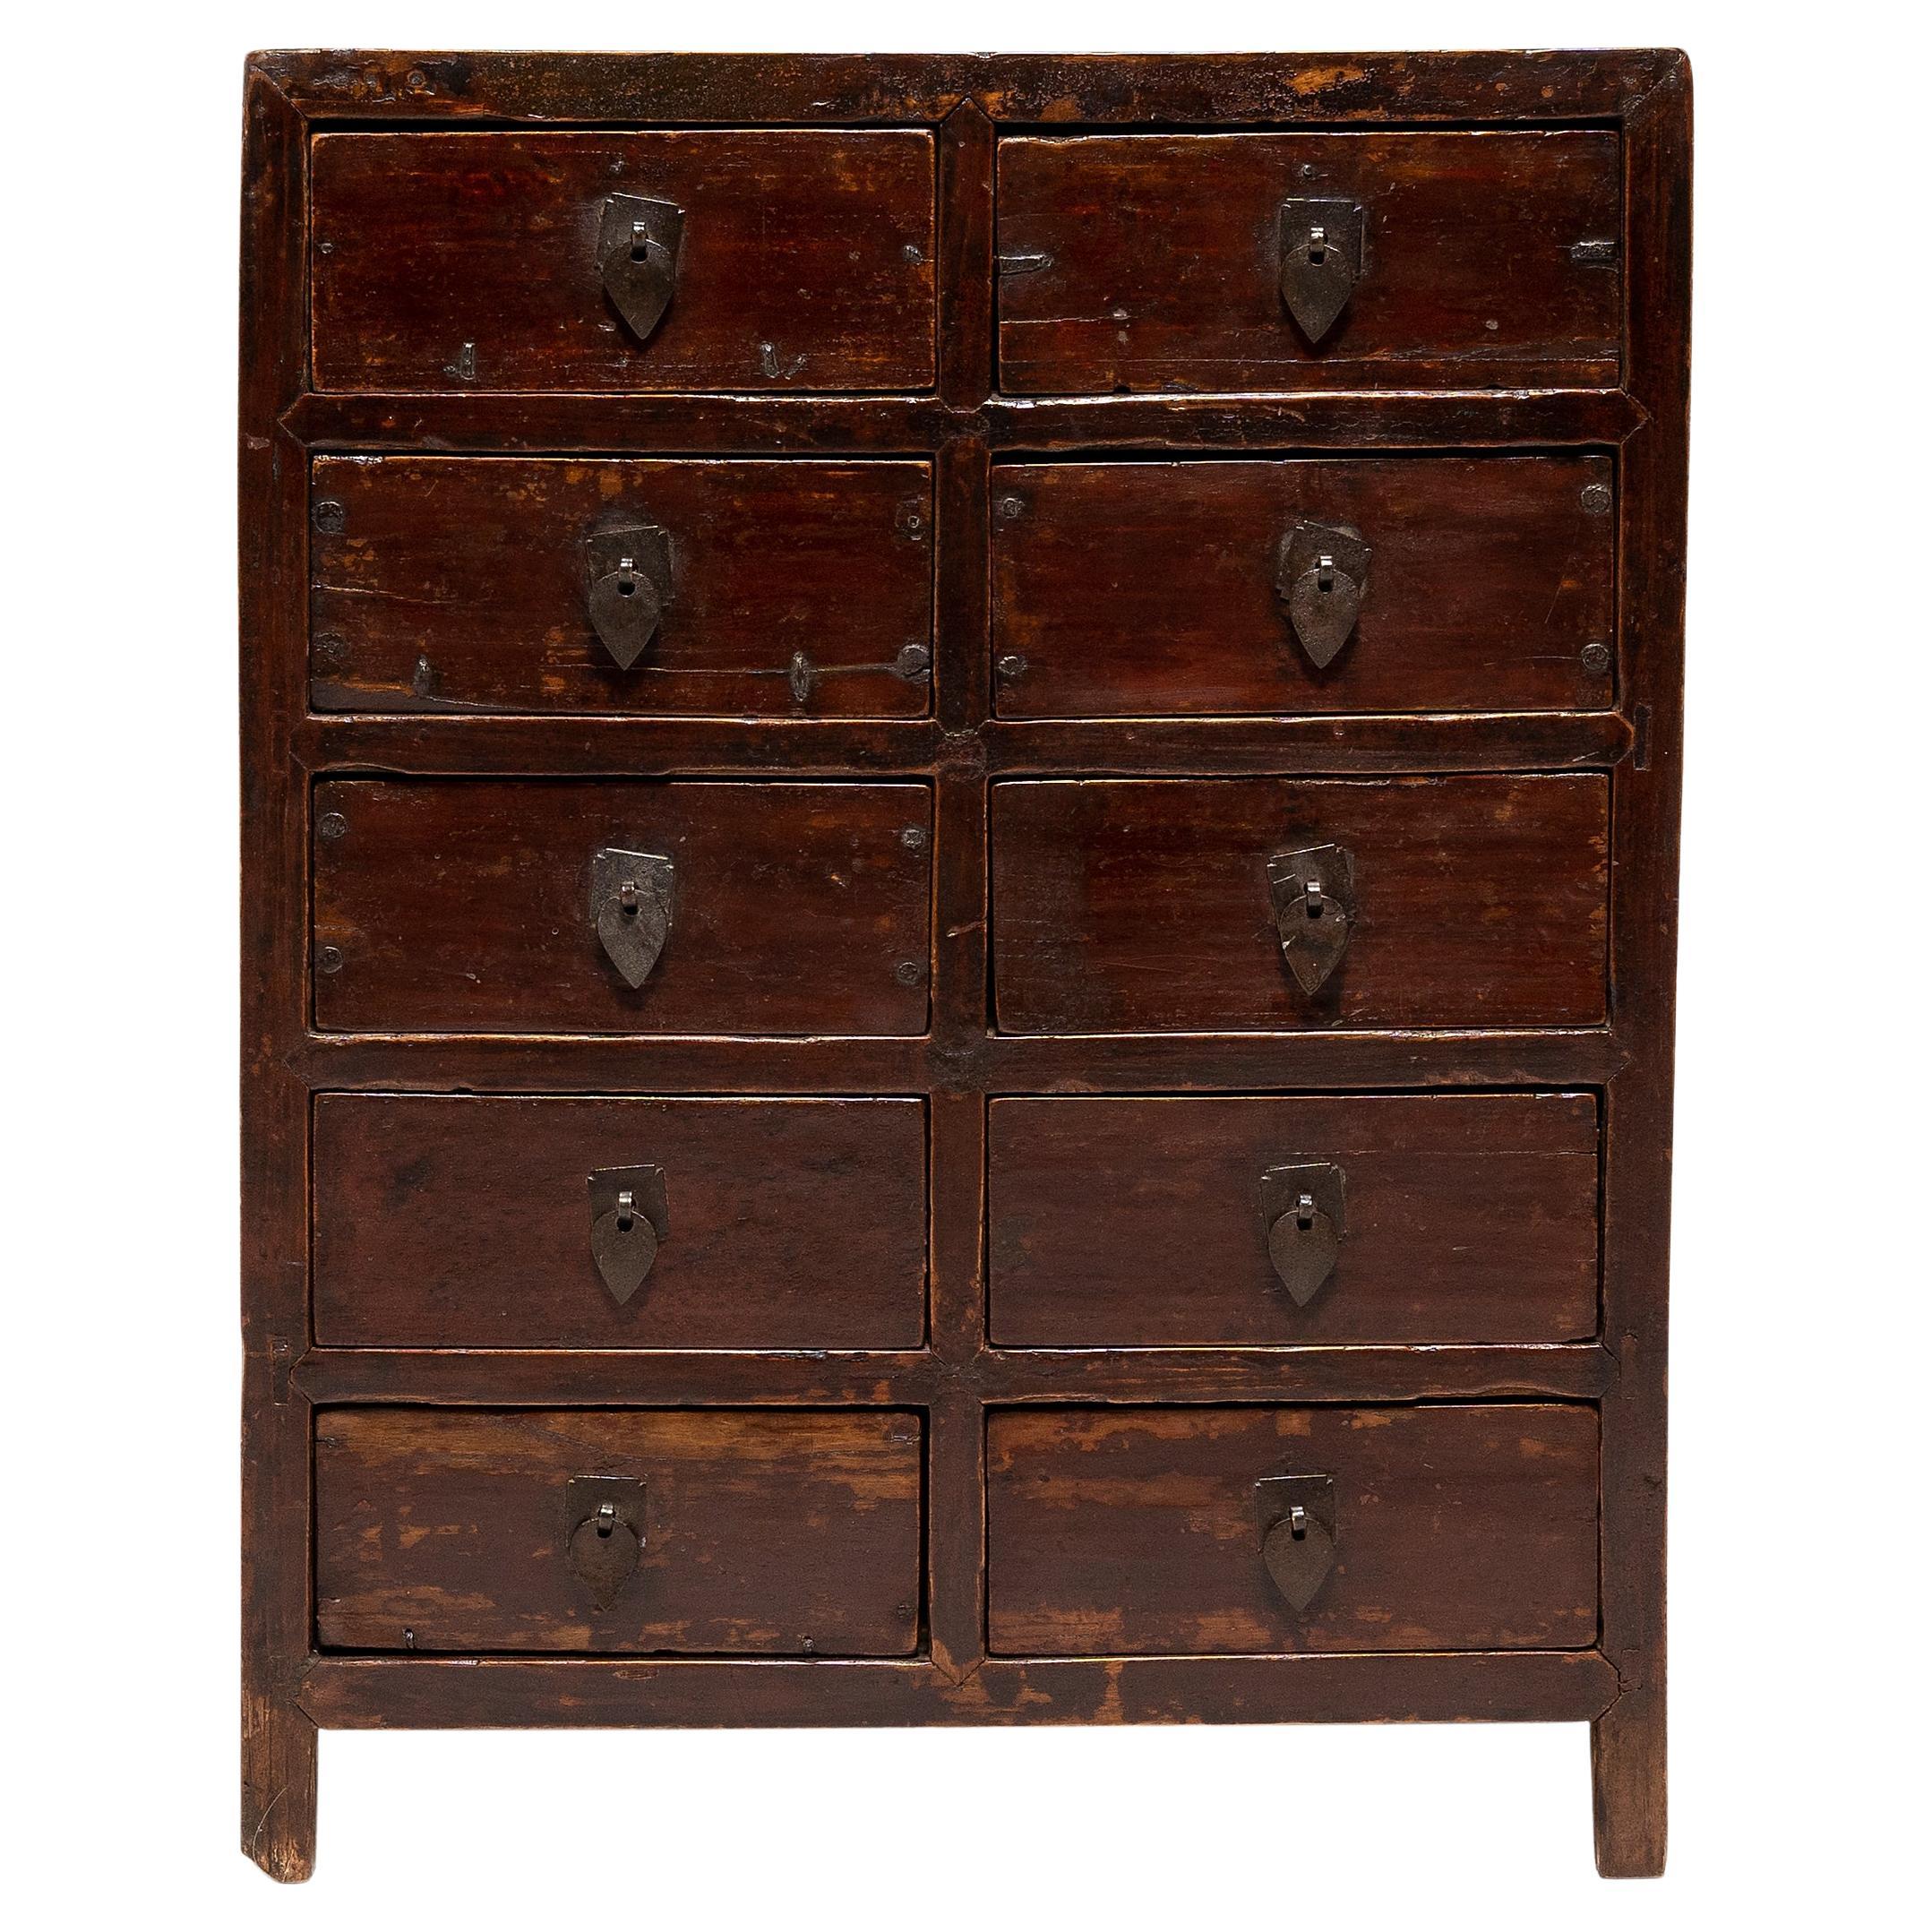 Chinese Ten Drawer Apothecary Chest, c. 1850